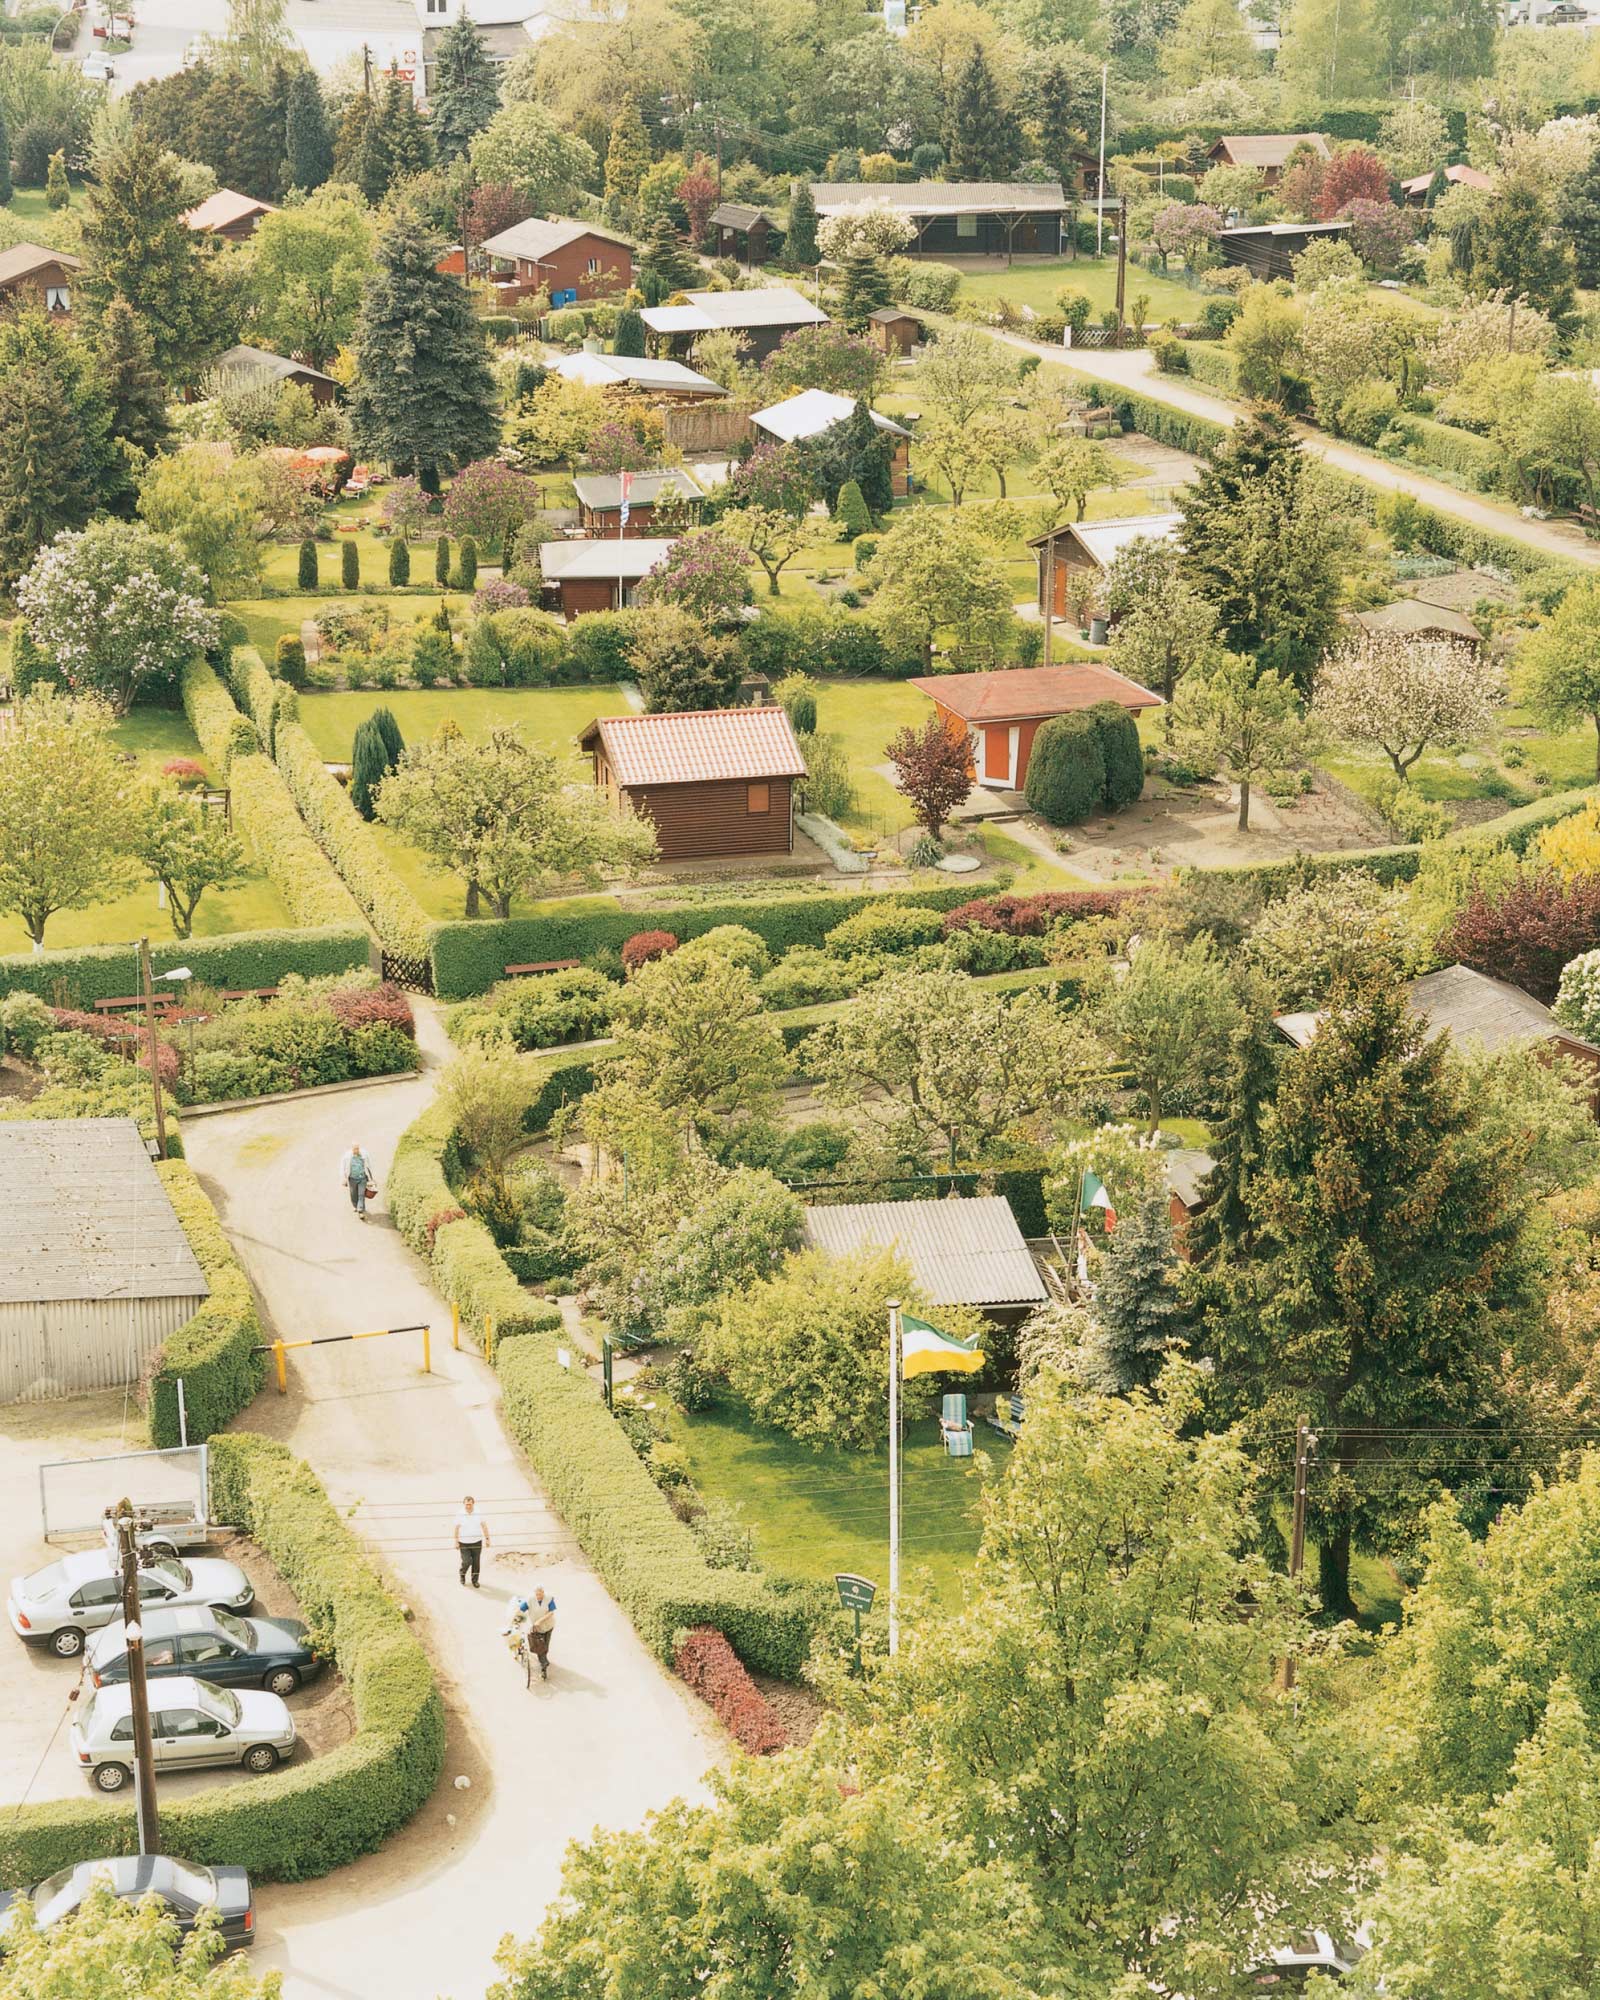 Aerial photograph of allotment gardens in a German city. To learn more about their peculiar history, see Jan Turowski’s article from this issue titled “Schreber Gardens.”